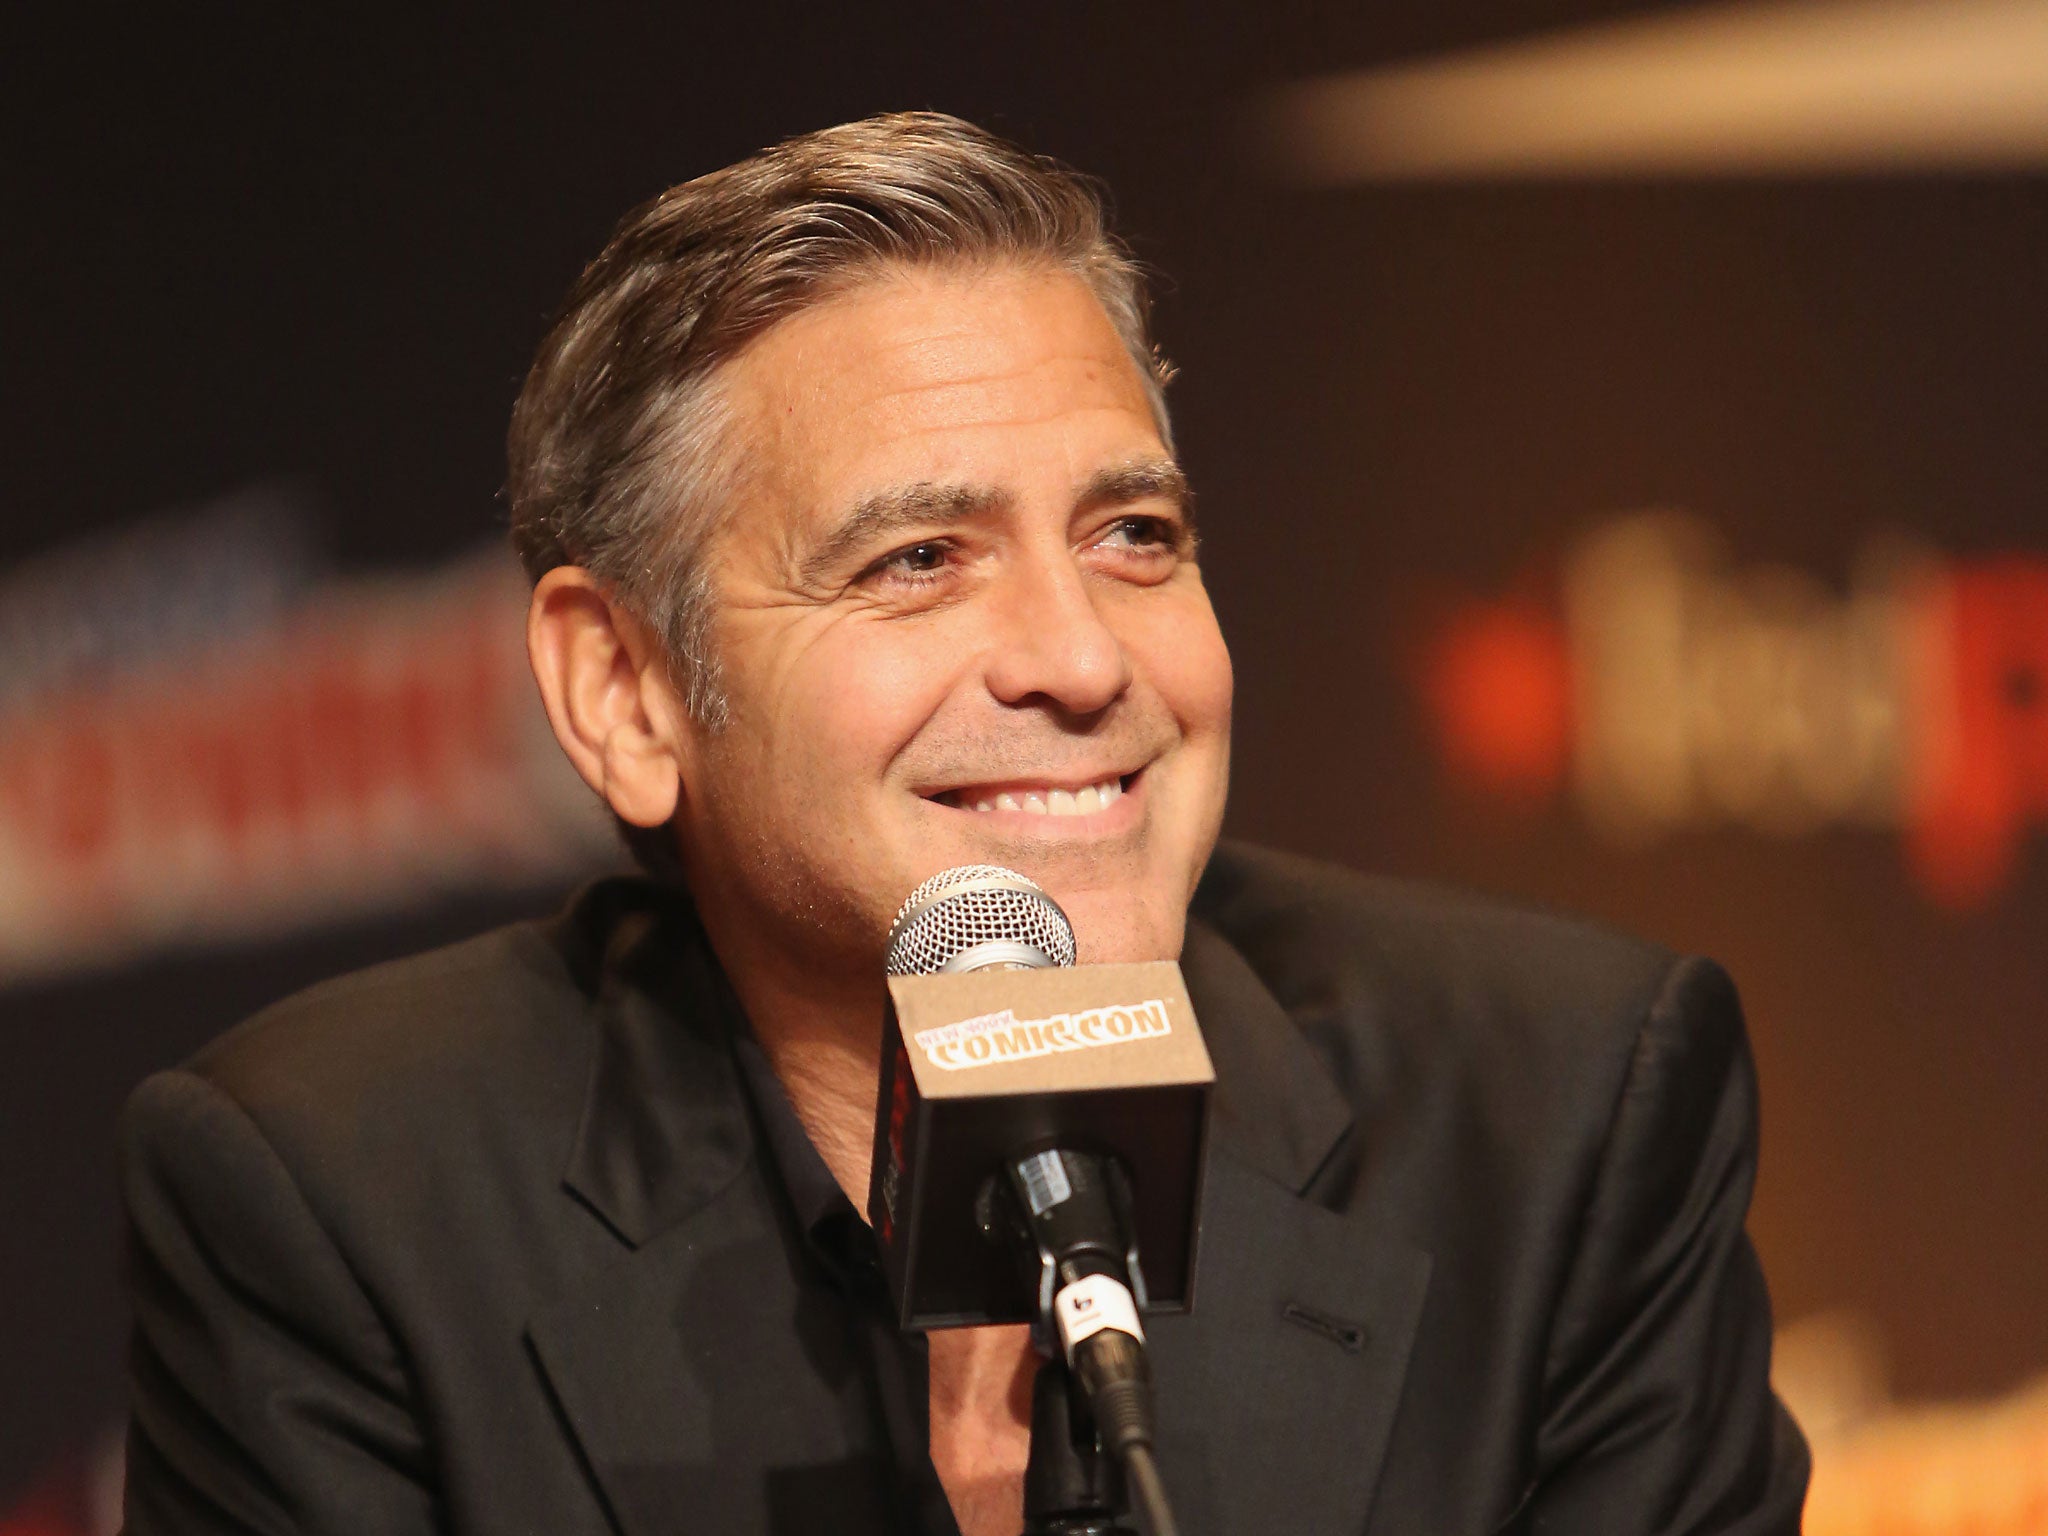 George Clooney speaking at Comic Con in New York